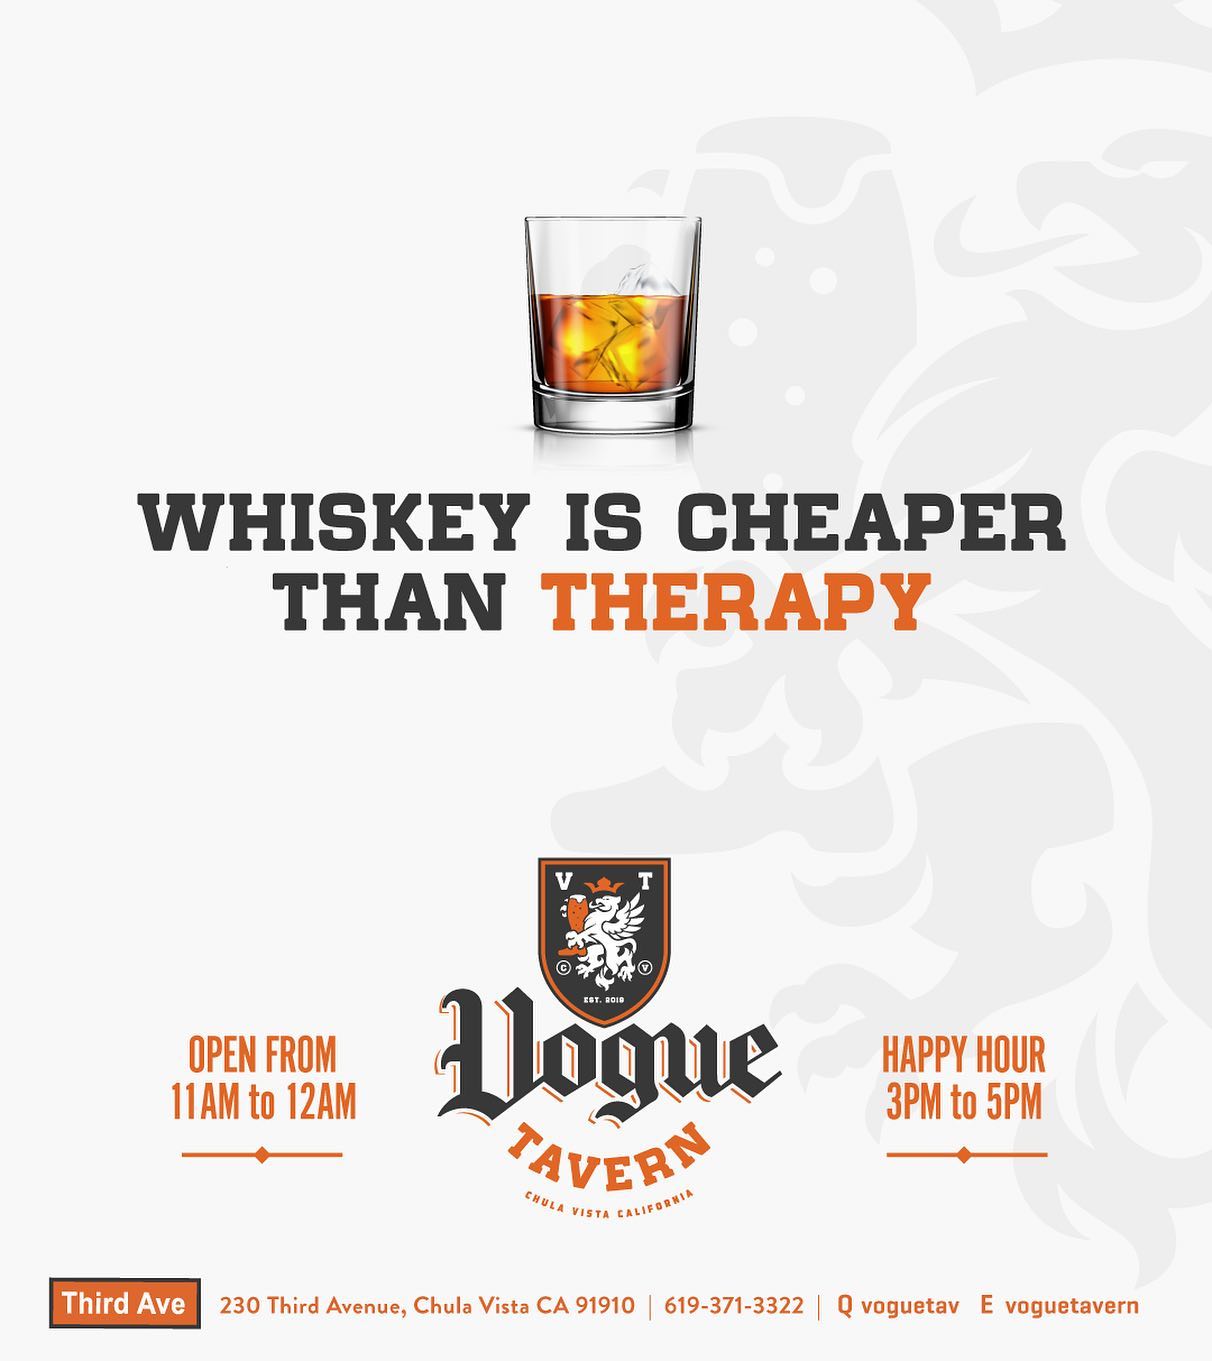 Whiskey is cheaper than therapy